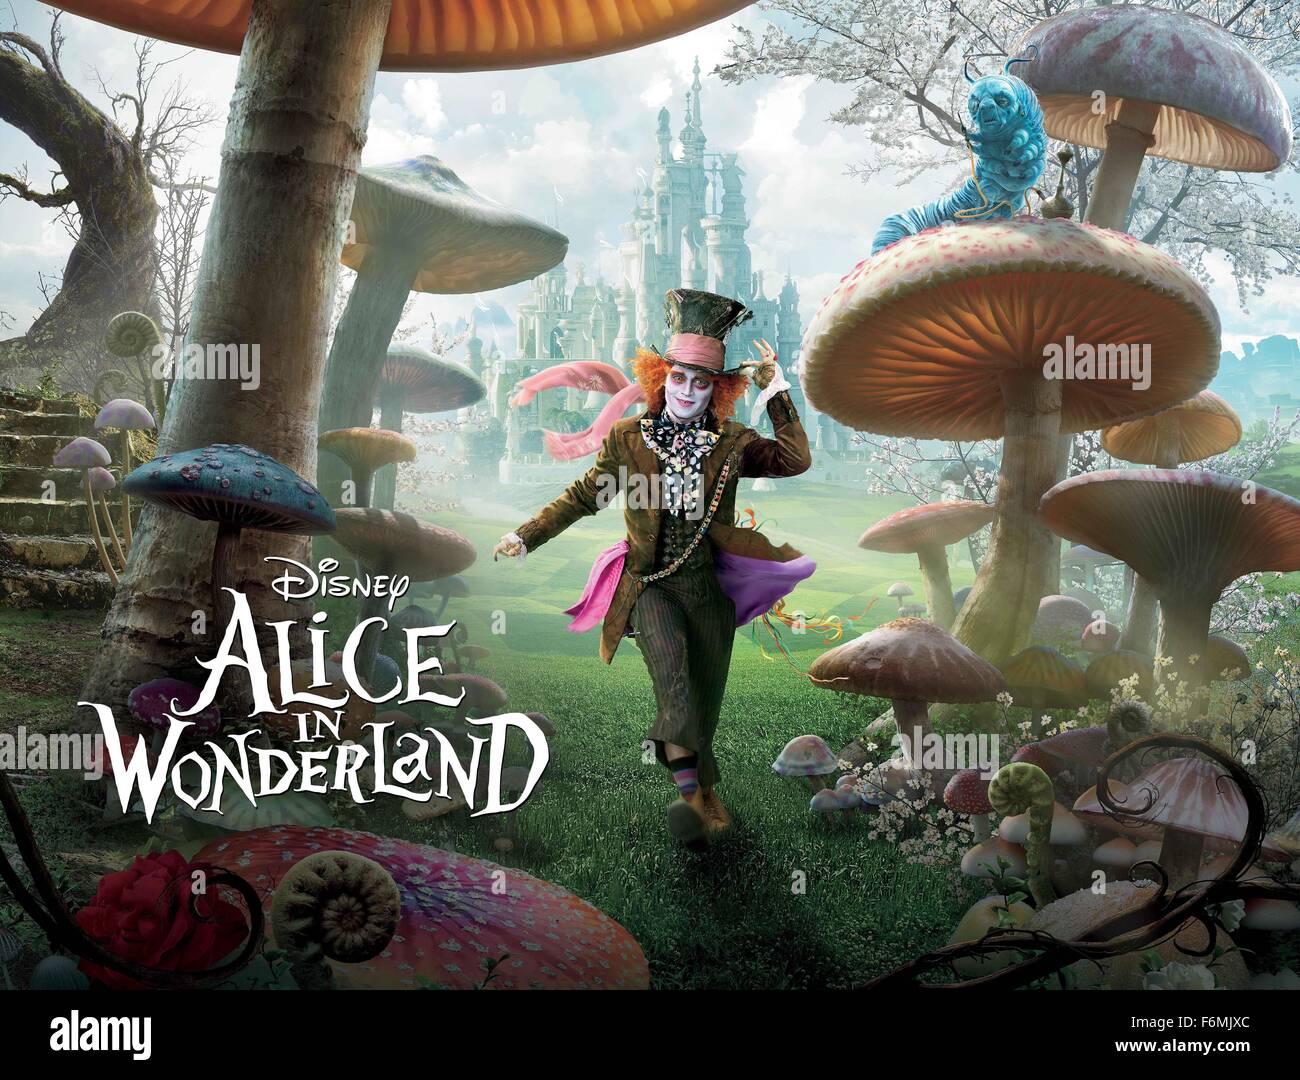 RELEASE DATE: March 5, 2010 MOVIE TITLE: Alice in Wonderland STUDIO: Walt  Disney Pictures DIRECTOR: Tim Burton PLOT: 19-year-old Alice returns to the  magical world from her childhood adventure, where she reunites